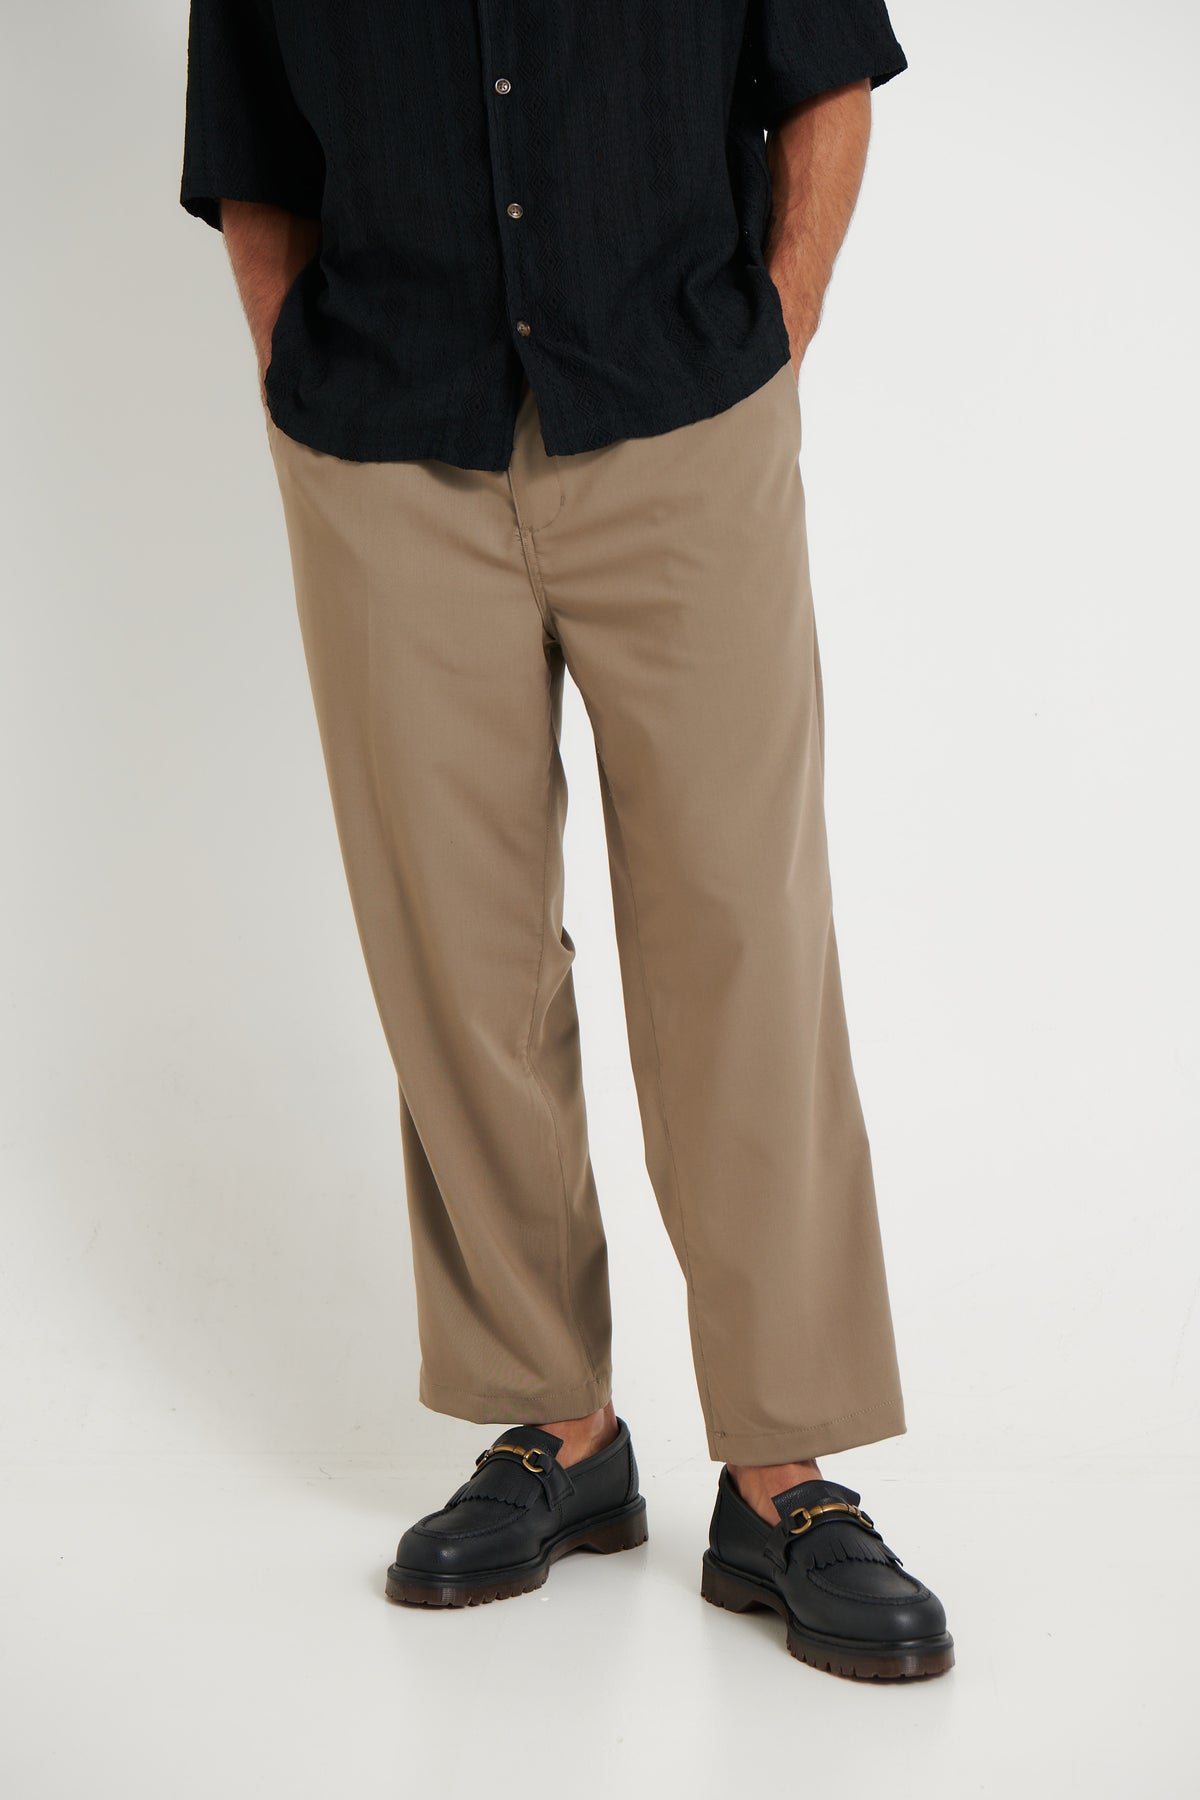 NTH Loose Fit Trouser Army - FINAL SALE